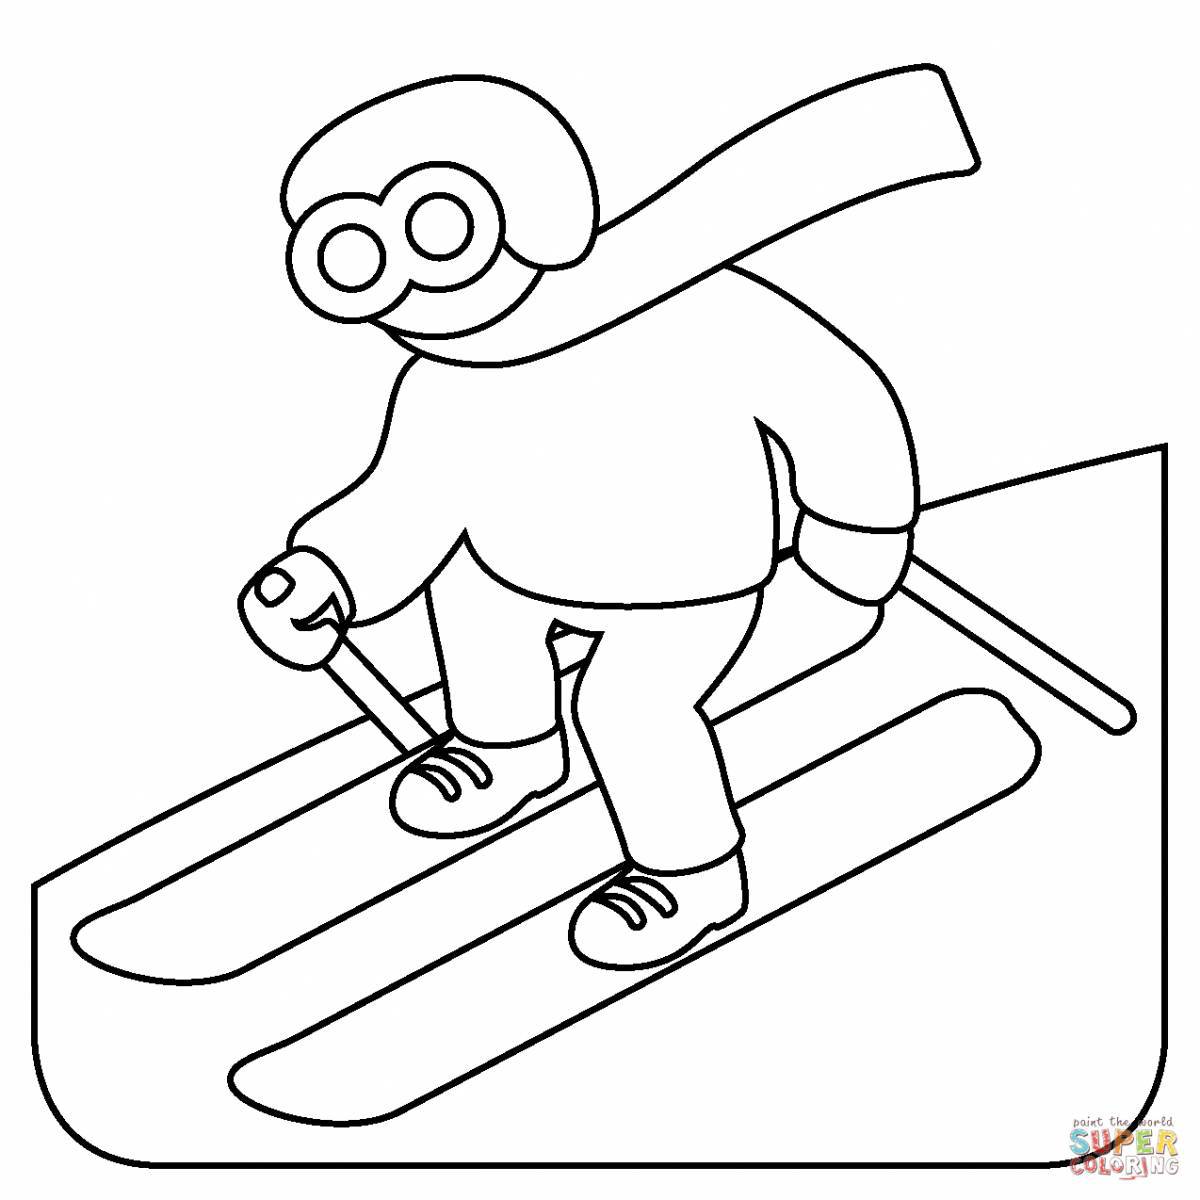 Coloring page nice skier